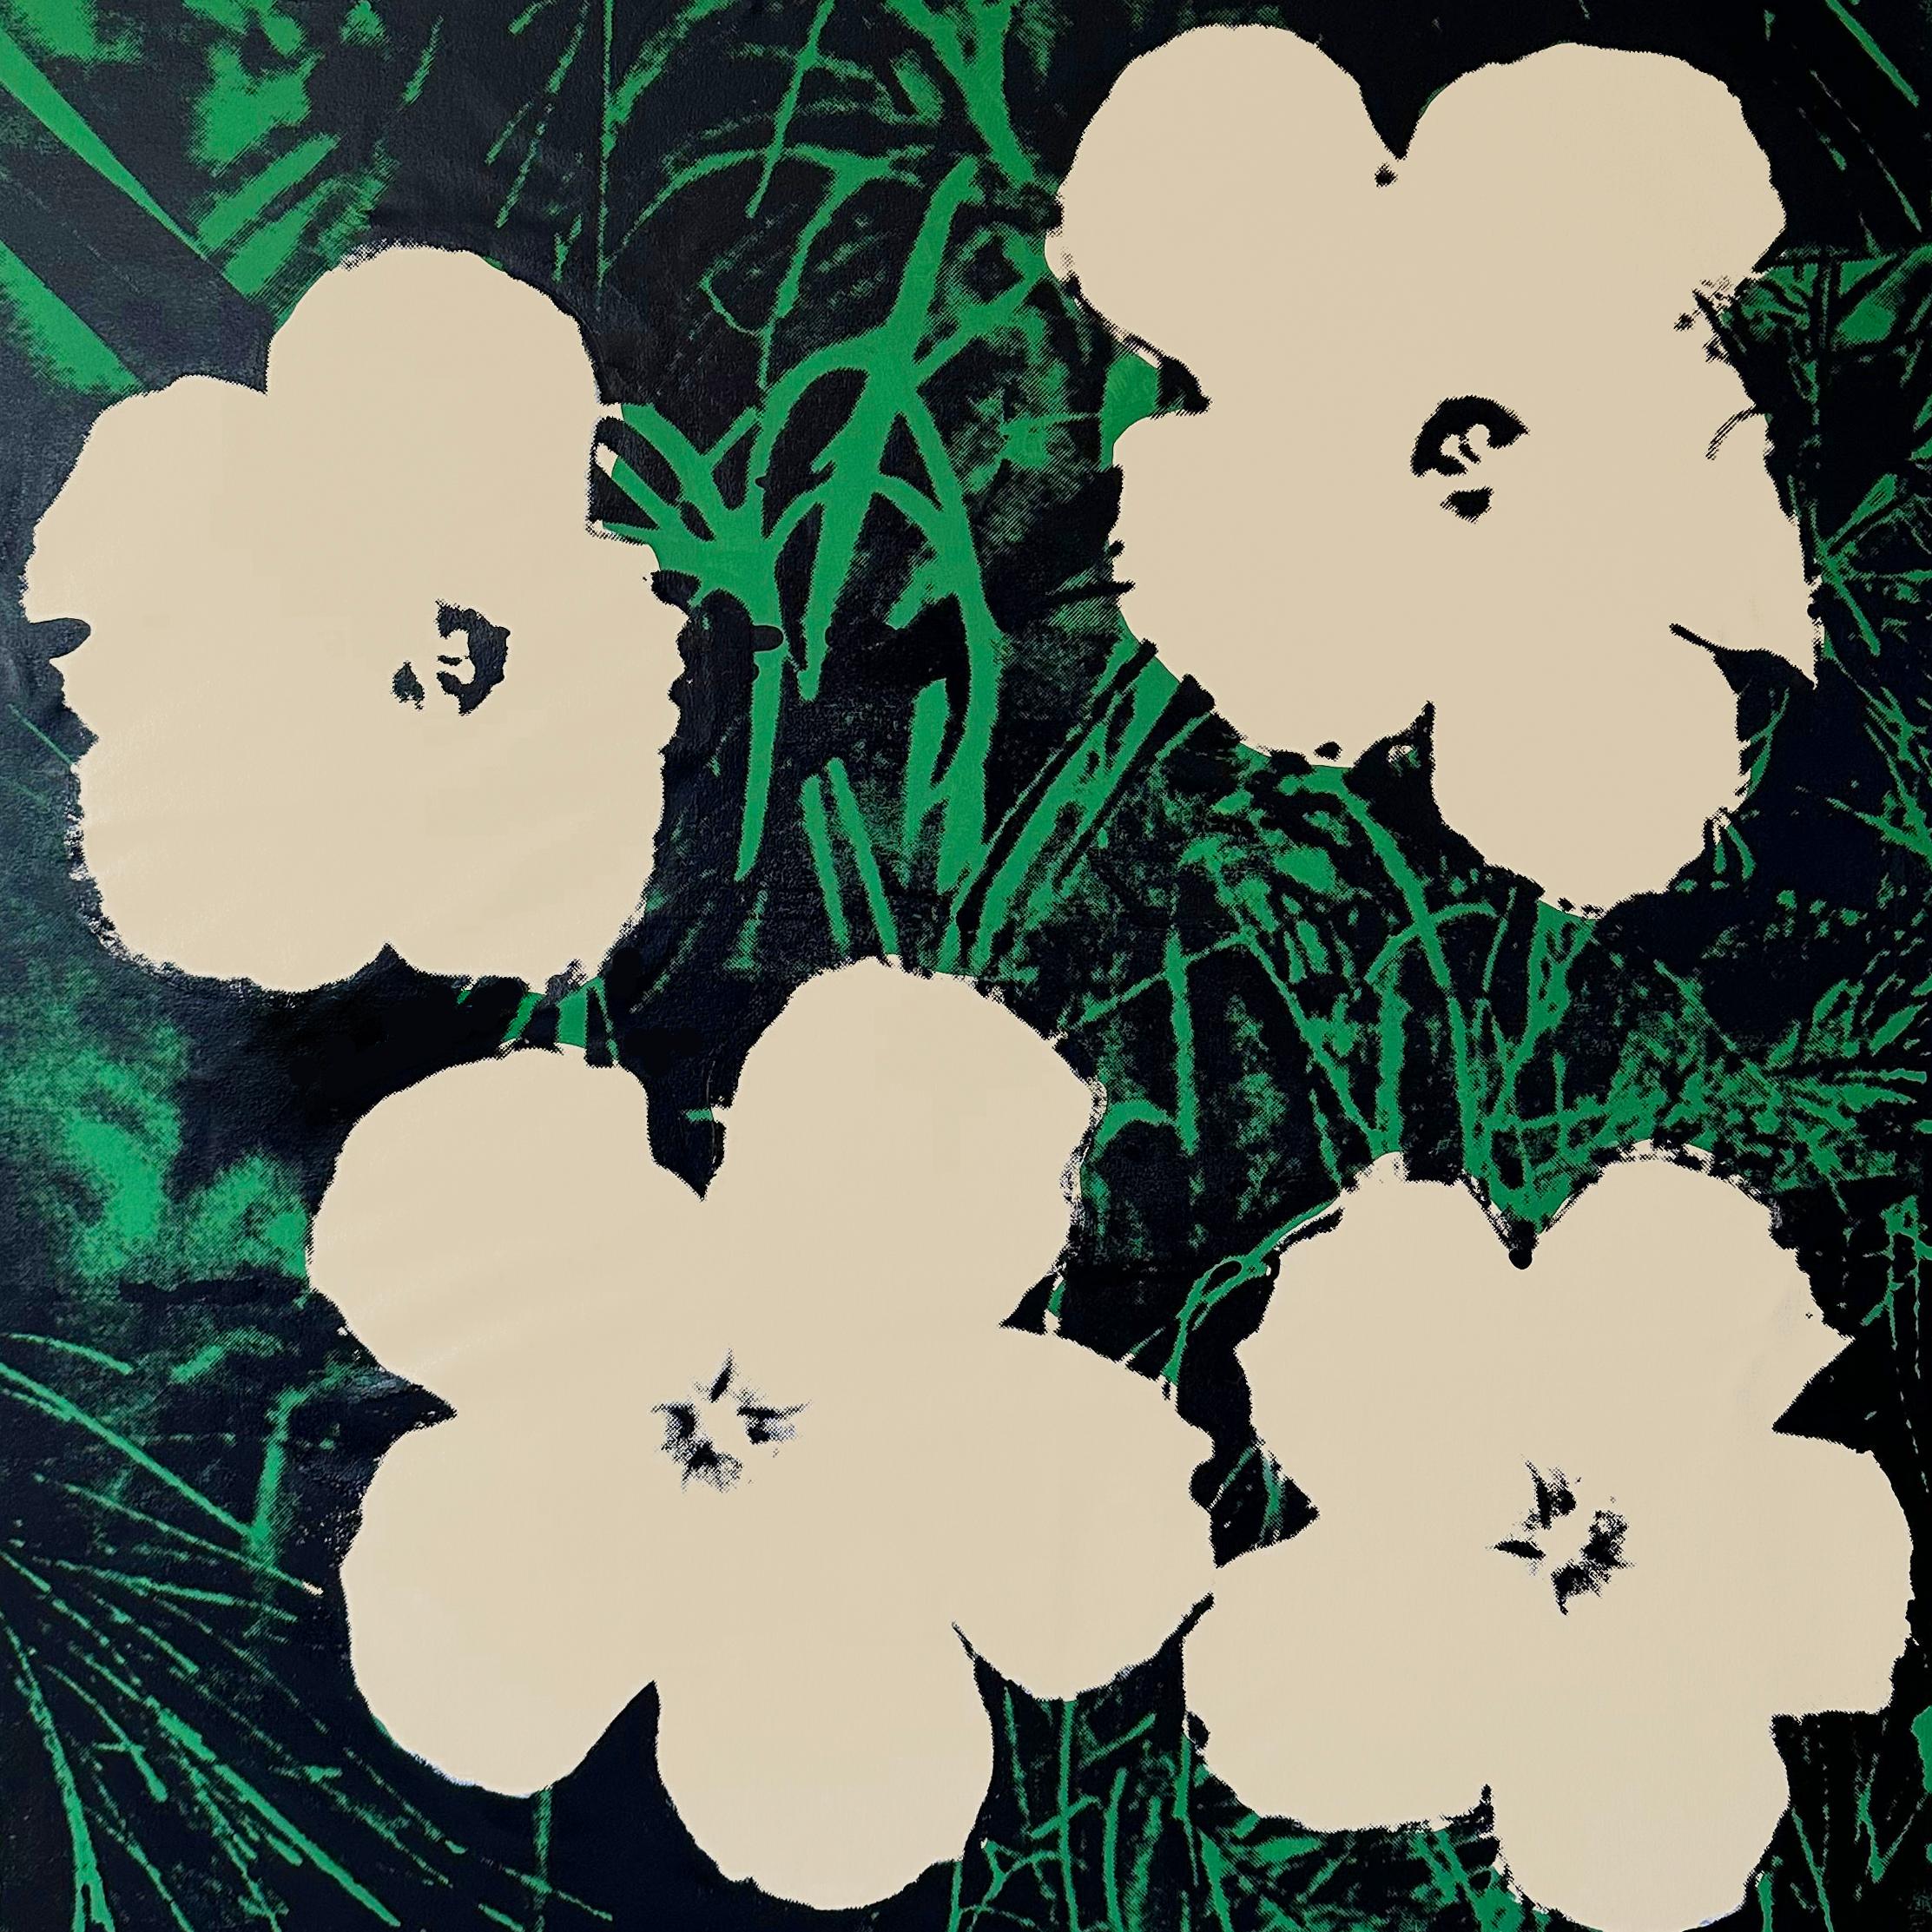 Denied Andy Warhol Flowers White 48 x48" on canvas Pop Art Painting Charles Lutz